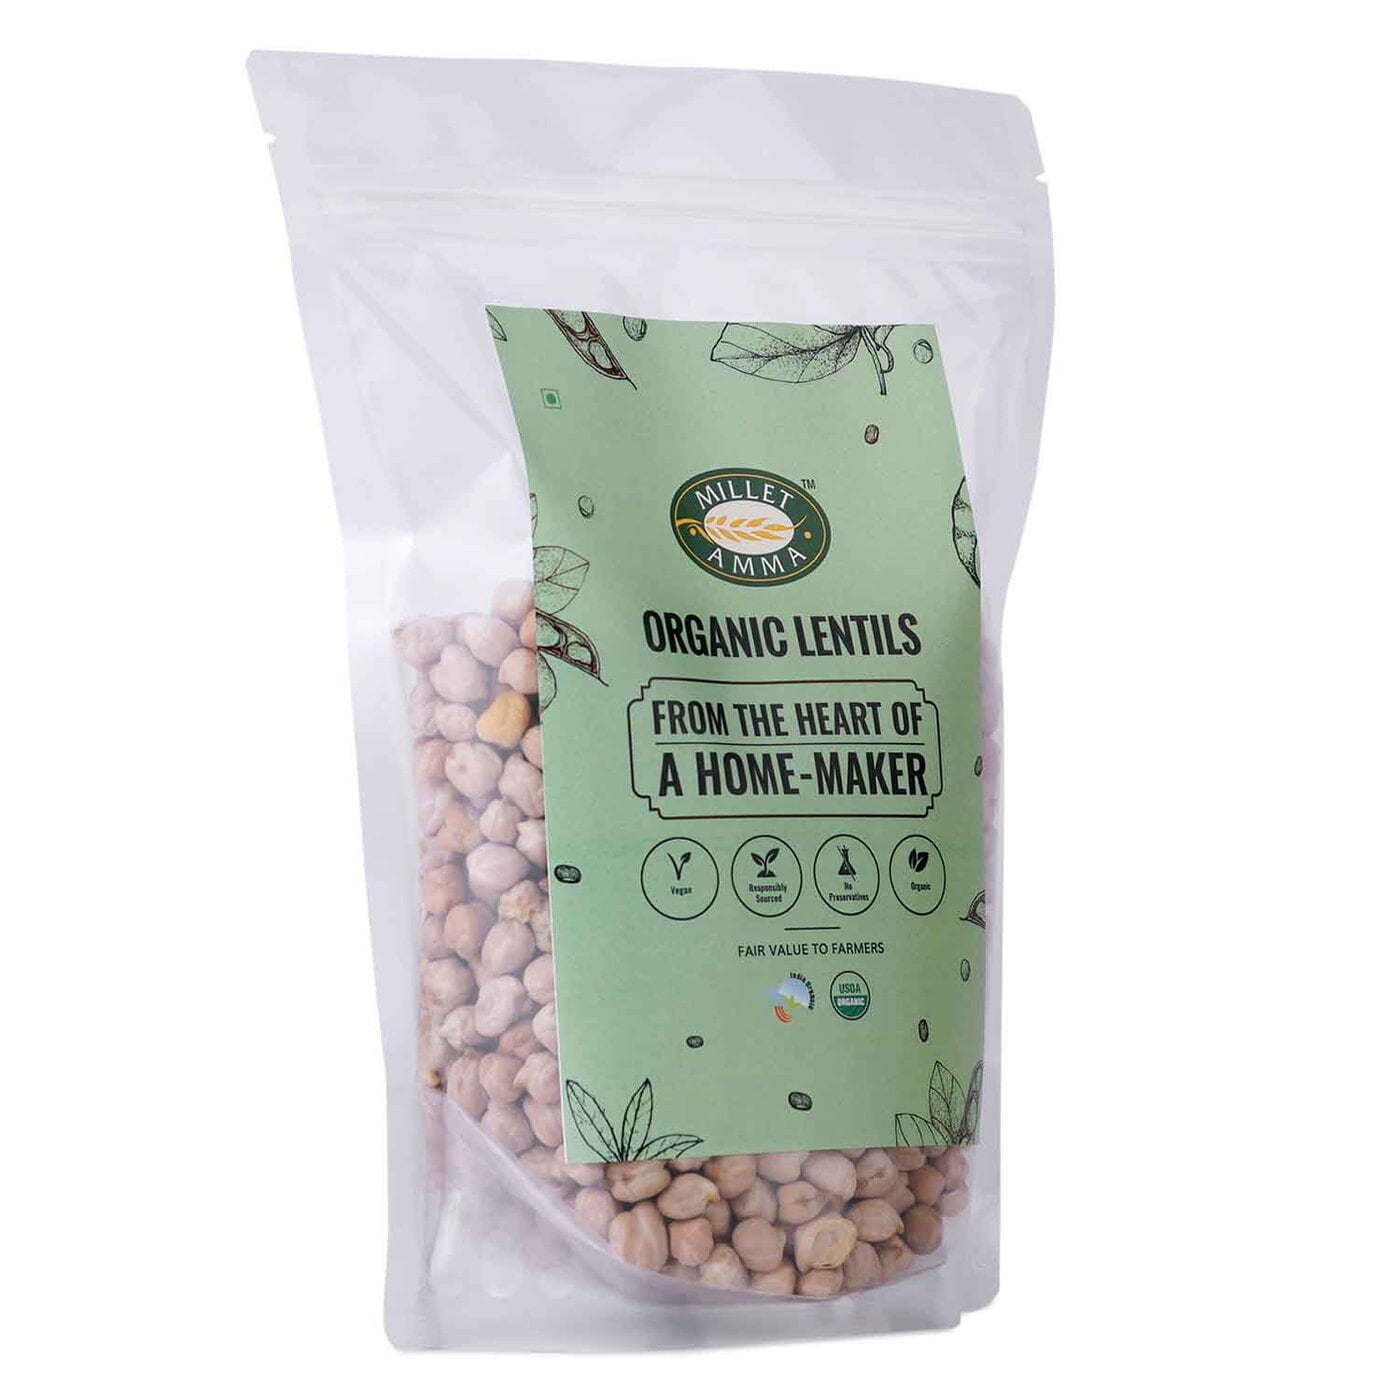 Milletamma’s Kabuli Chana is packed with dense nutrients.  It is a great source of plant- based protein and a great way to add all the amino acids in your diet.  It contains a moderate number of calories while being high in fibre and protein. Adding it to the diet helps you to manage the body weight